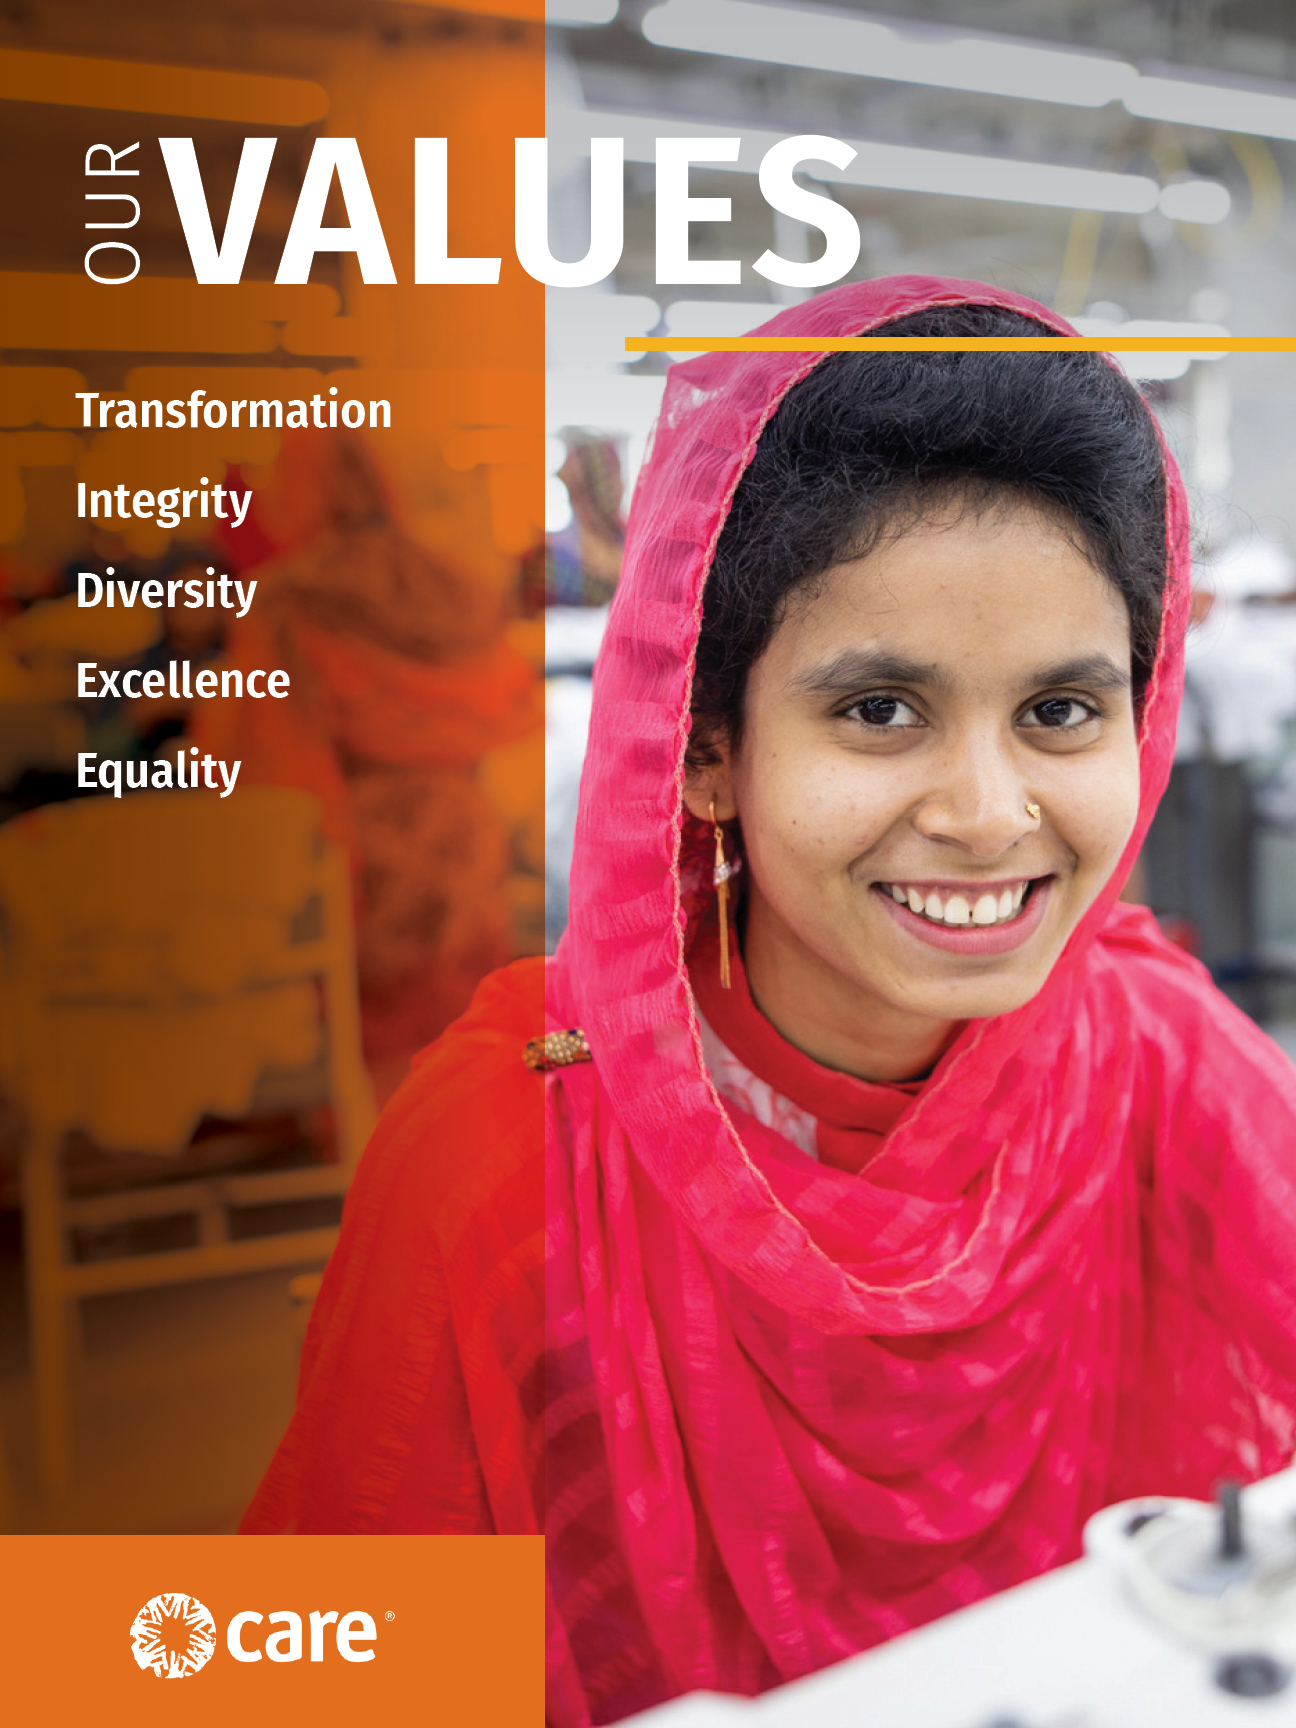 "Our values - transformation, integrity, diversity, excellence, equality."